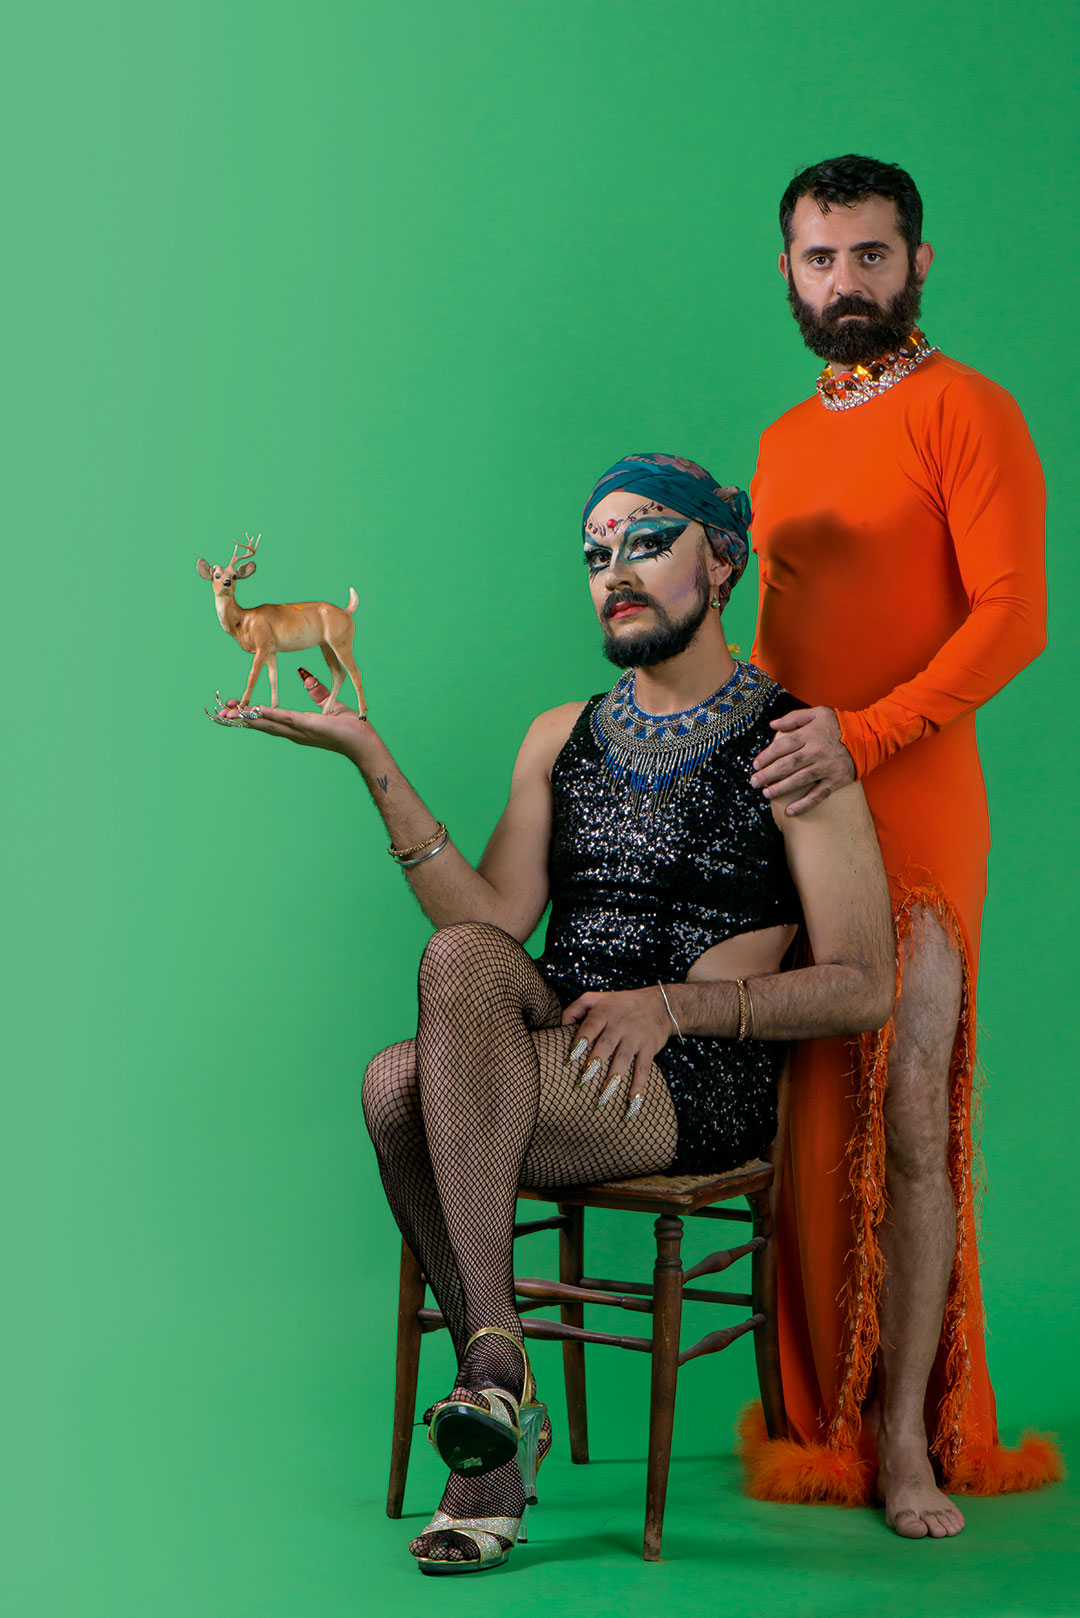 The deer that made it into Art & Queer Culture